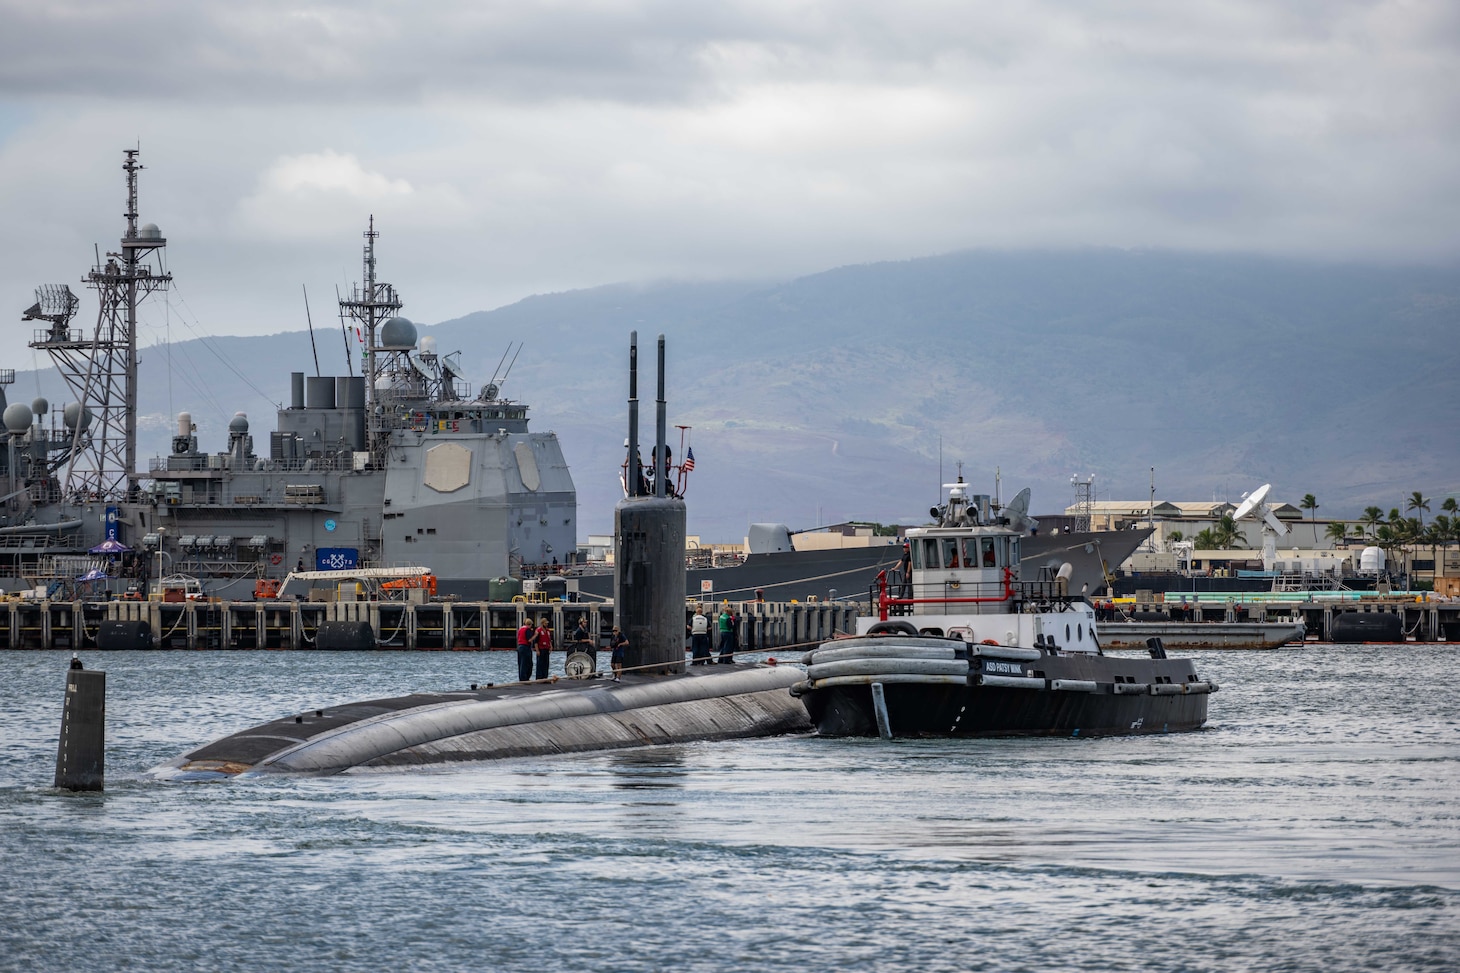 PEARL HARBOR, Hawaii (Dec. 8, 2021) The Los Angeles-class fast-attack submarine USS Jefferson City (SSN 759) departs Joint Base Pearl Harbor-Hickam as it heads to Naval Station Guam for a homeport shift. Jefferson City is capable of supporting various missions, including anti-submarine warfare, anti-surface ship warfare, strike warfare and intelligence, surveillance and reconnaissance. (U.S. Navy photo by Mass Communication Specialist 1st Class Michael B Zingaro/Released)